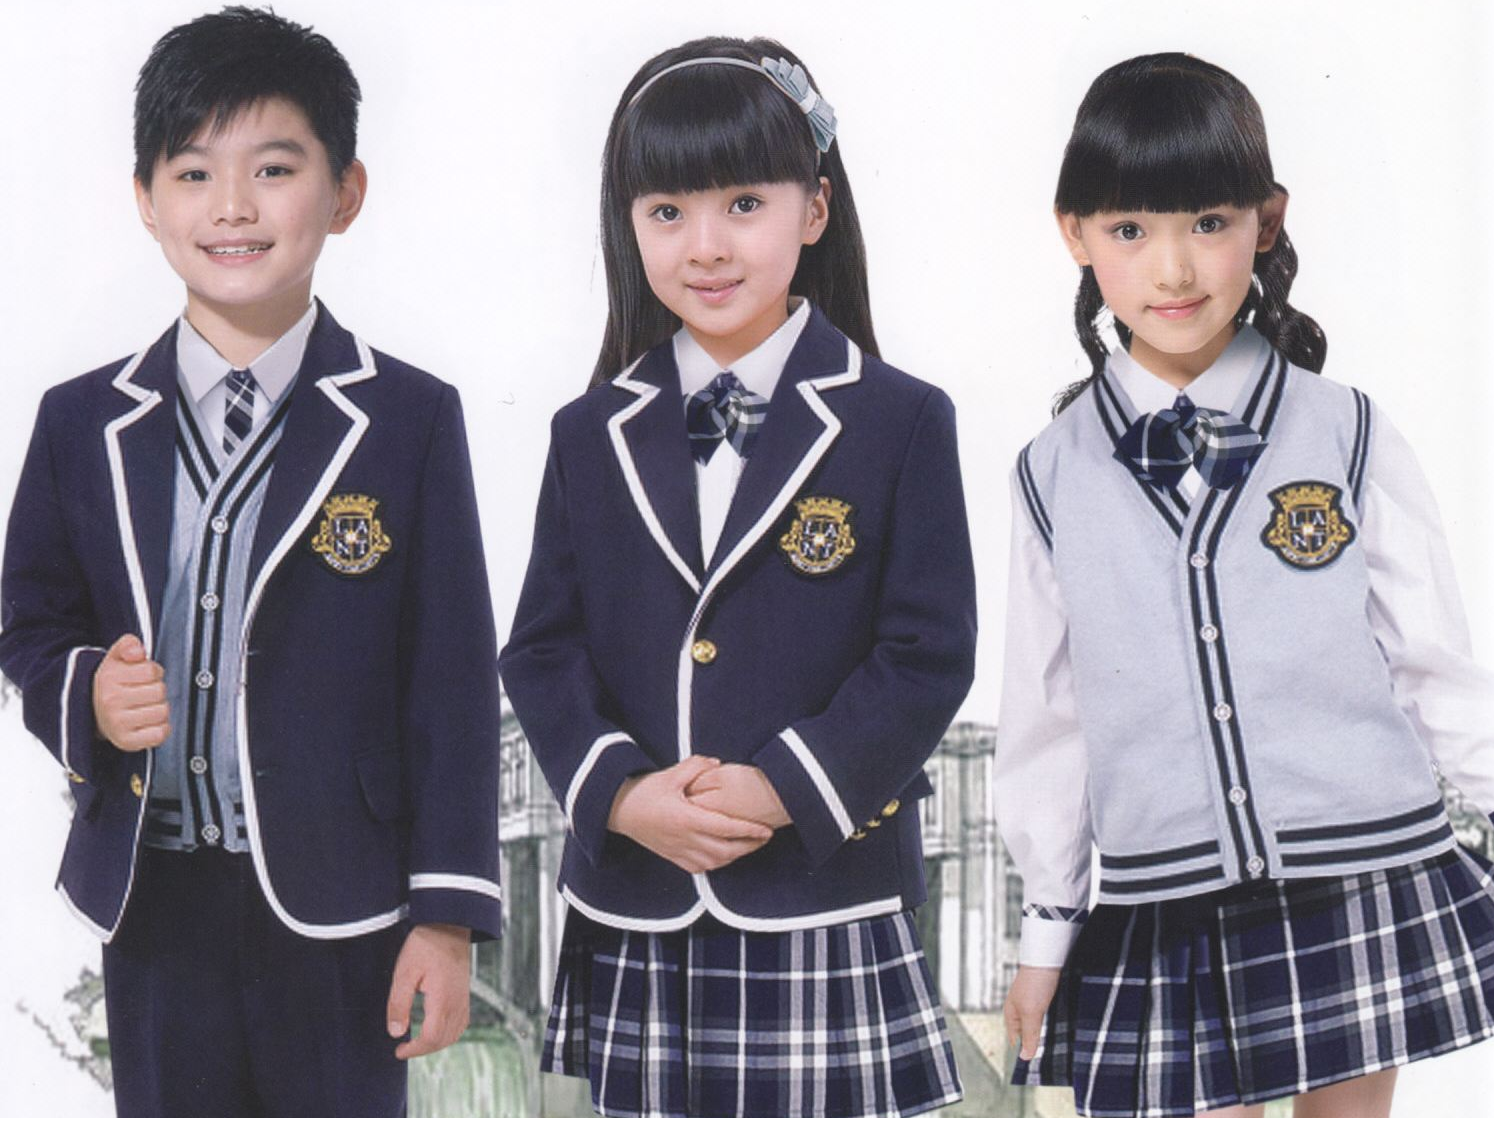 what material are school uniform made of？